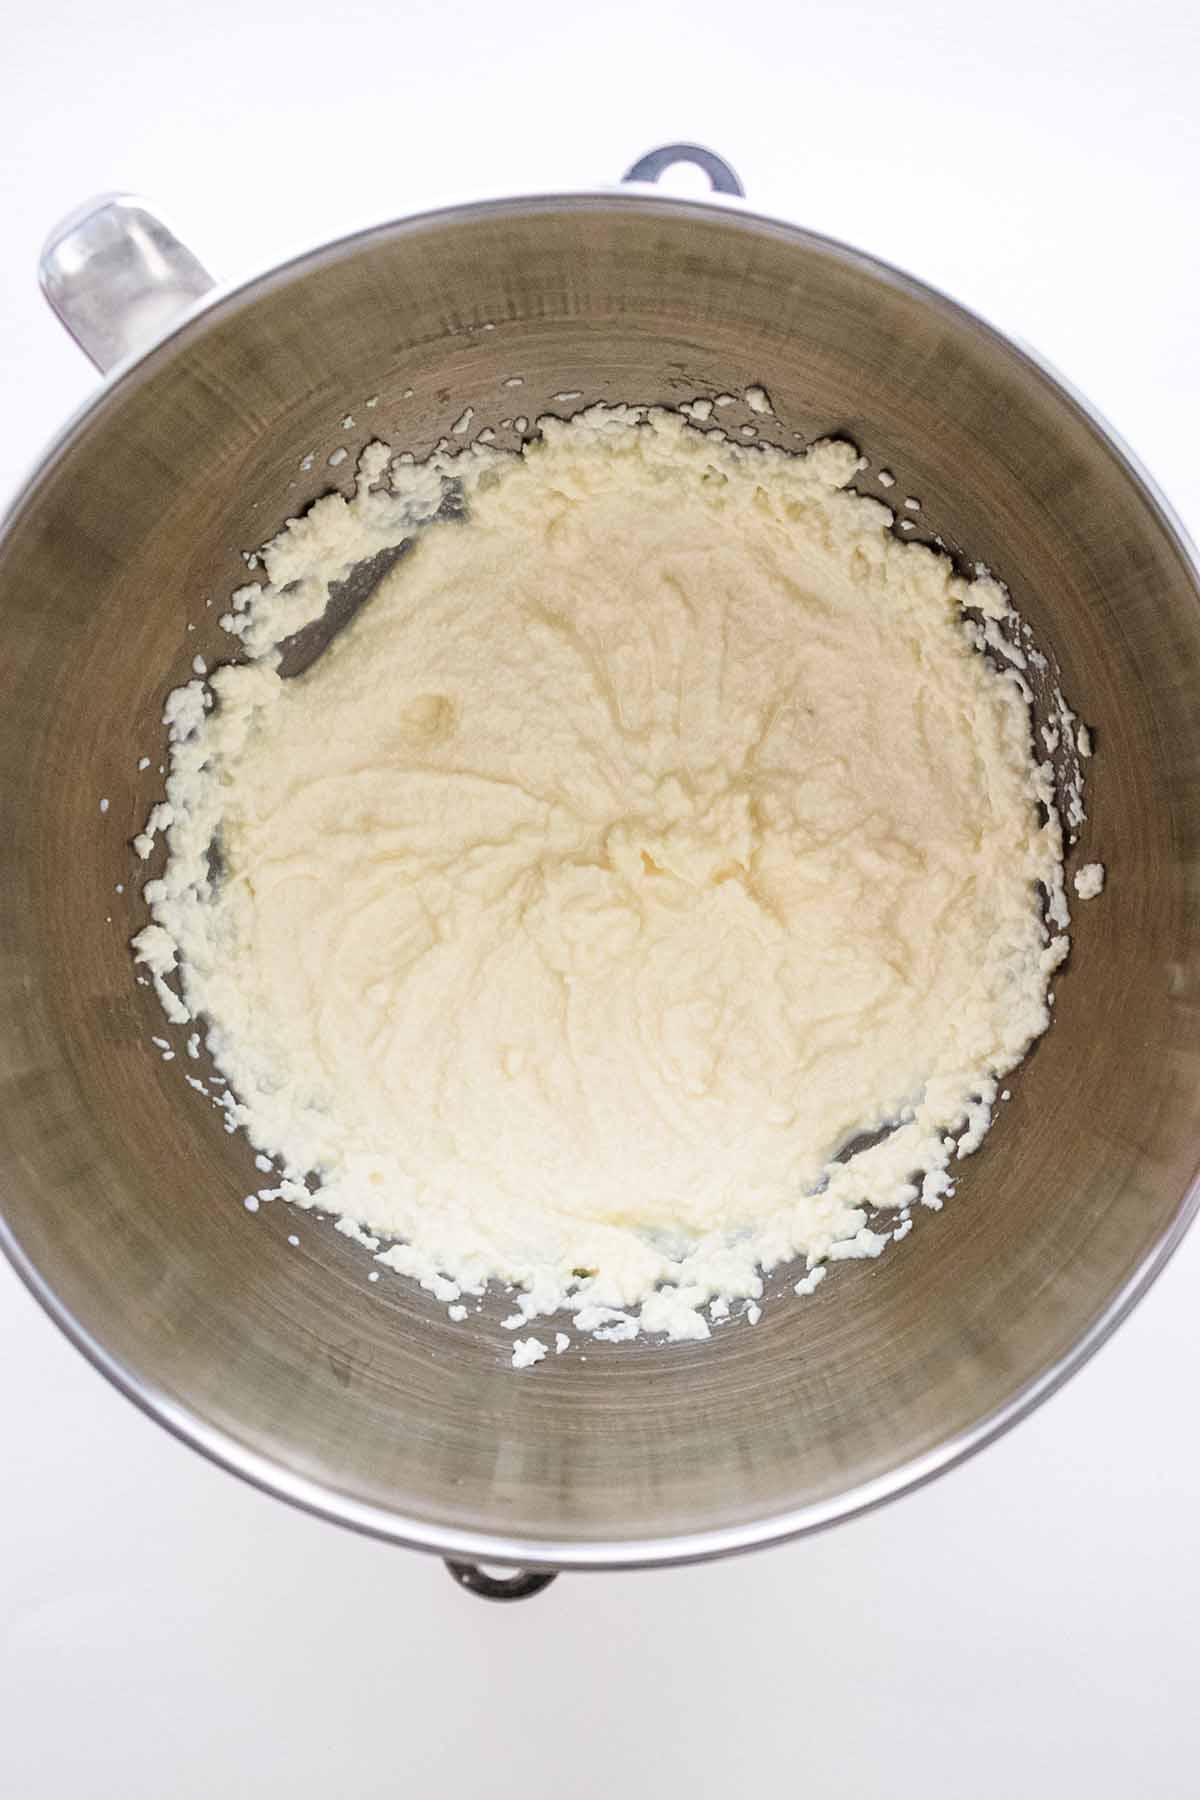 Whipped ricotta in a stainless steel bowl.